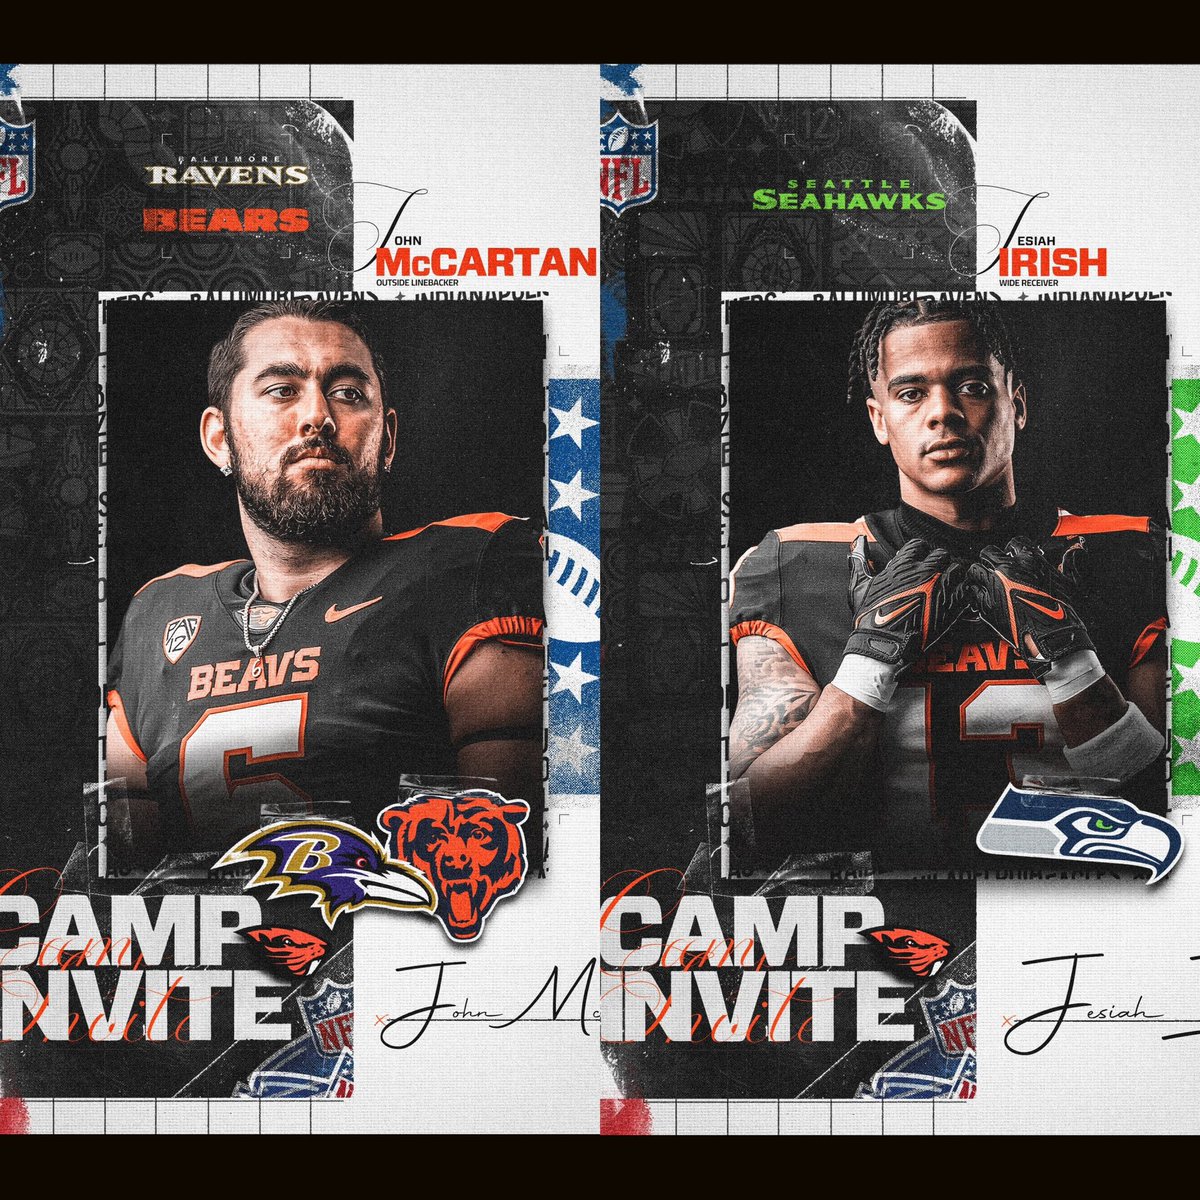 Huge congratulations to all these guys and their opportunities at the next level! #GoBeavs